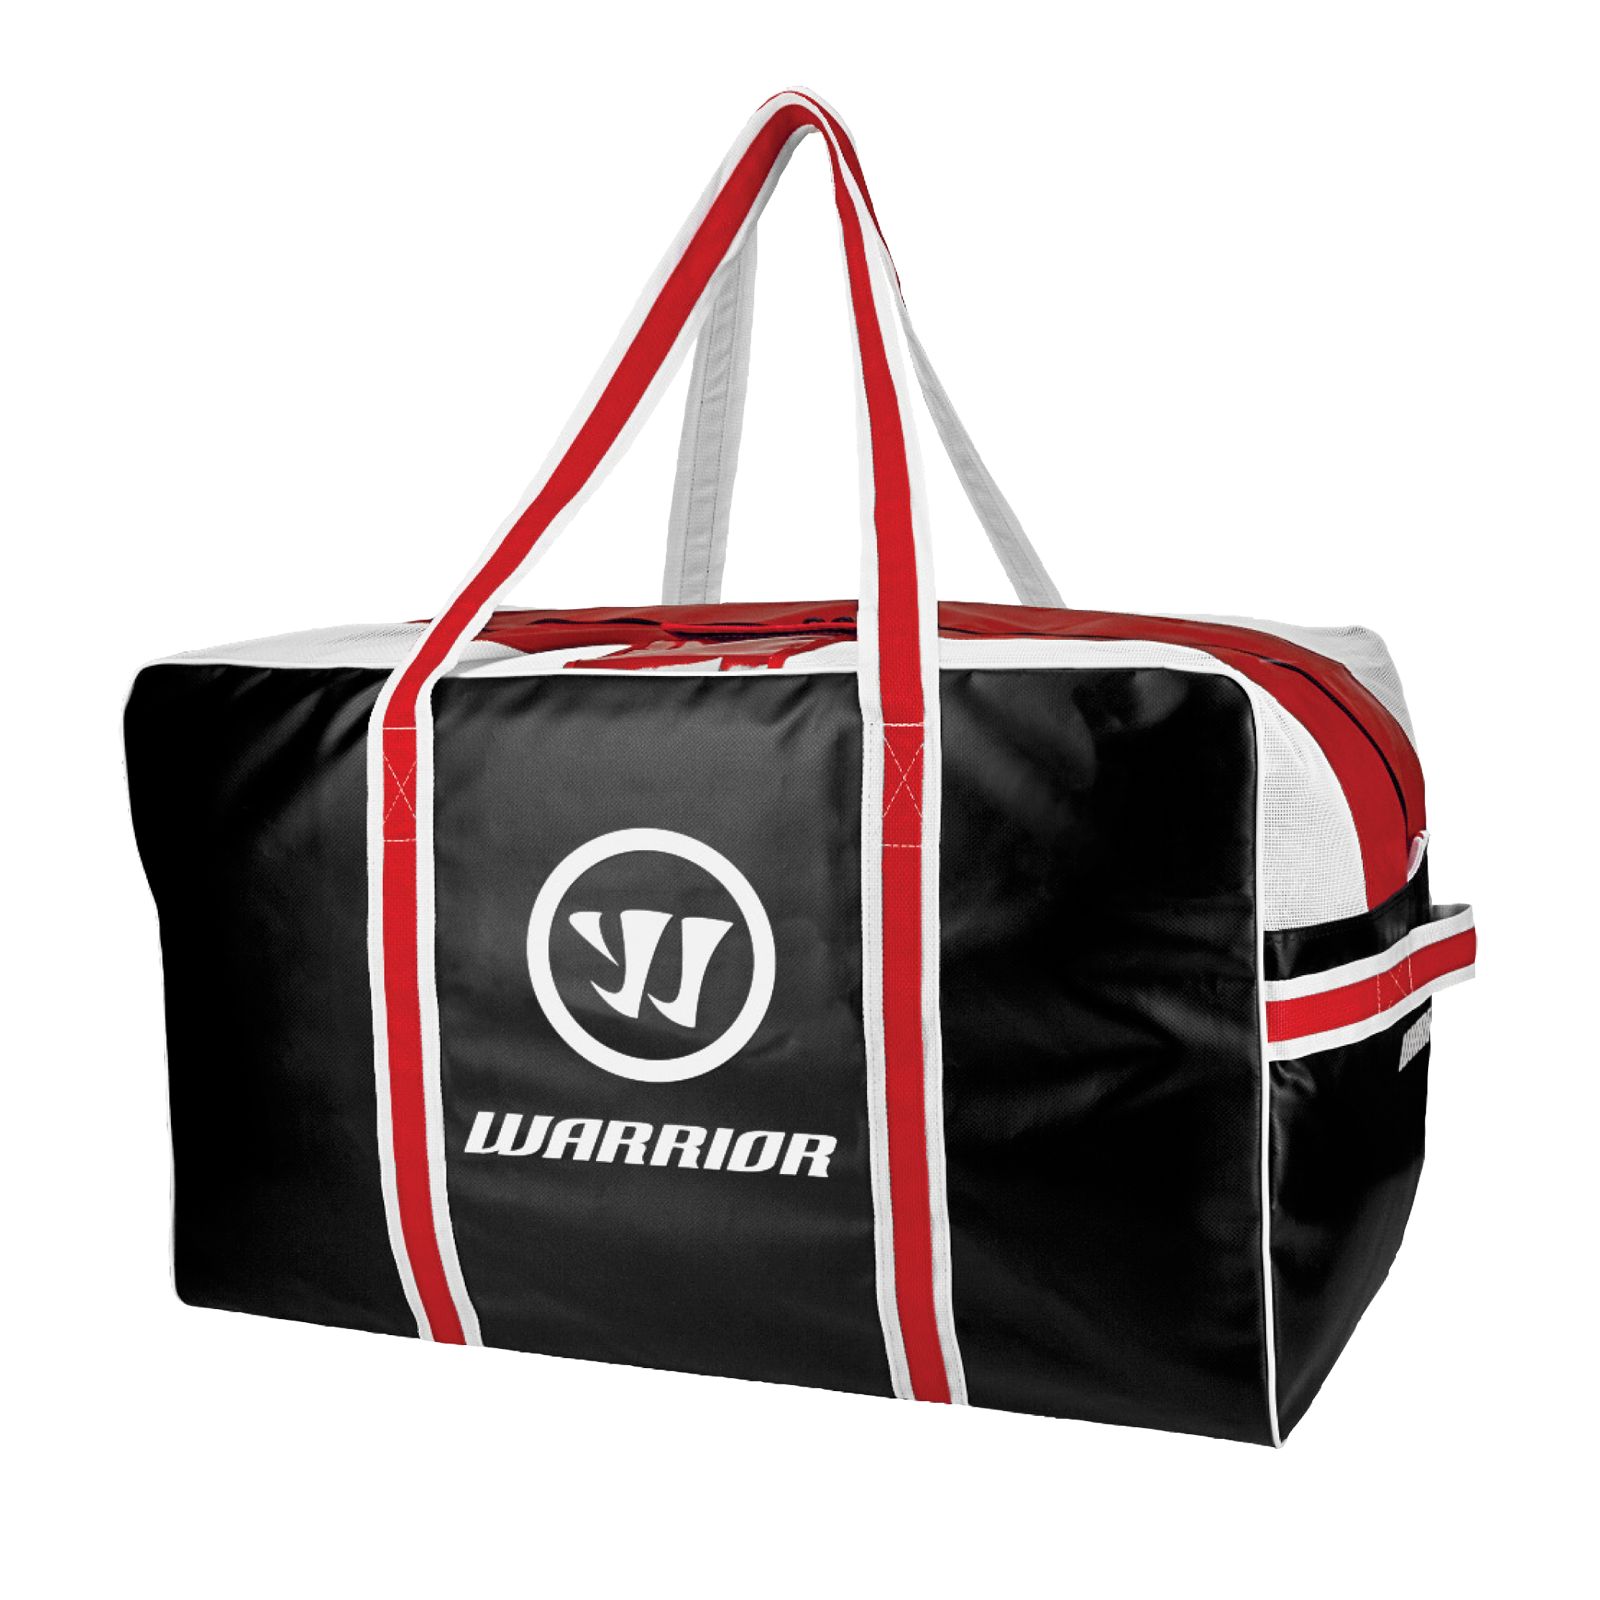 Warrior Pro Bag, Black with Red & White image number 1